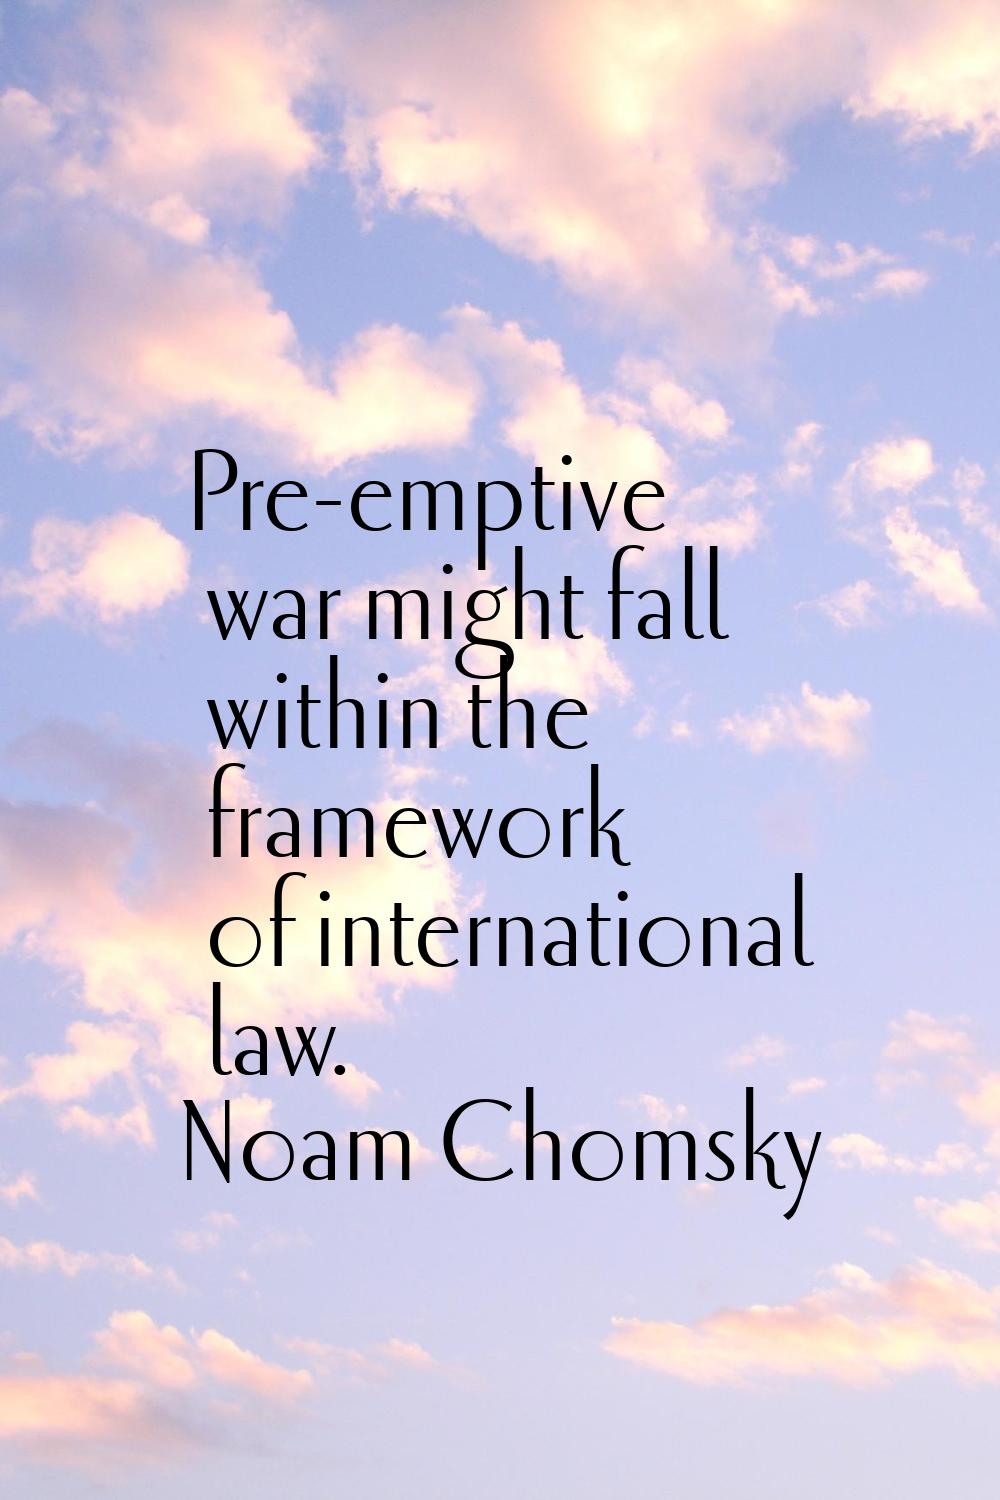 Pre-emptive war might fall within the framework of international law.